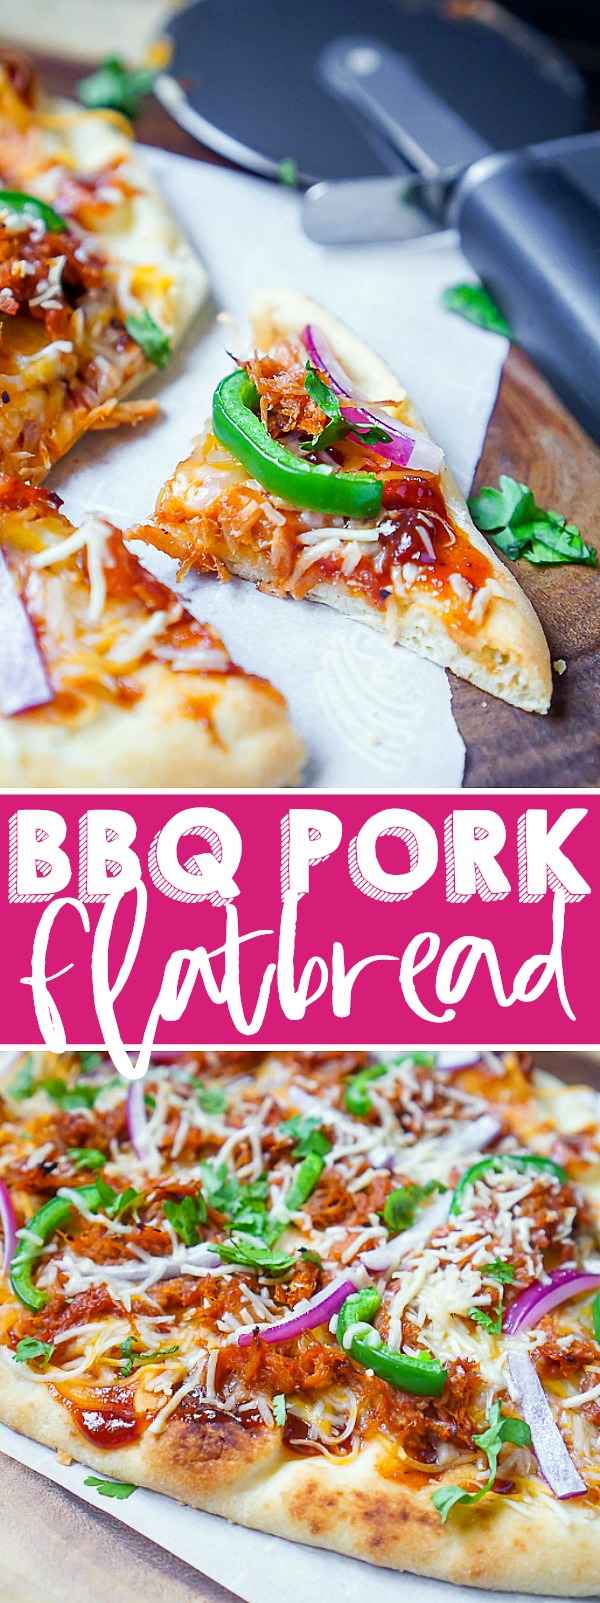 BBQ Pulled Pork Flatbread Pizza is downright addicting! Whether you want to enjoy this recipe for lunch, dinner or with your friends on Game Day, this easy flatbread recipe takes only 15 minutes to cook and always delivers great flavor! | THE LOVE NERDS #pizzarecipe #pulledpork #gameday #easydinner